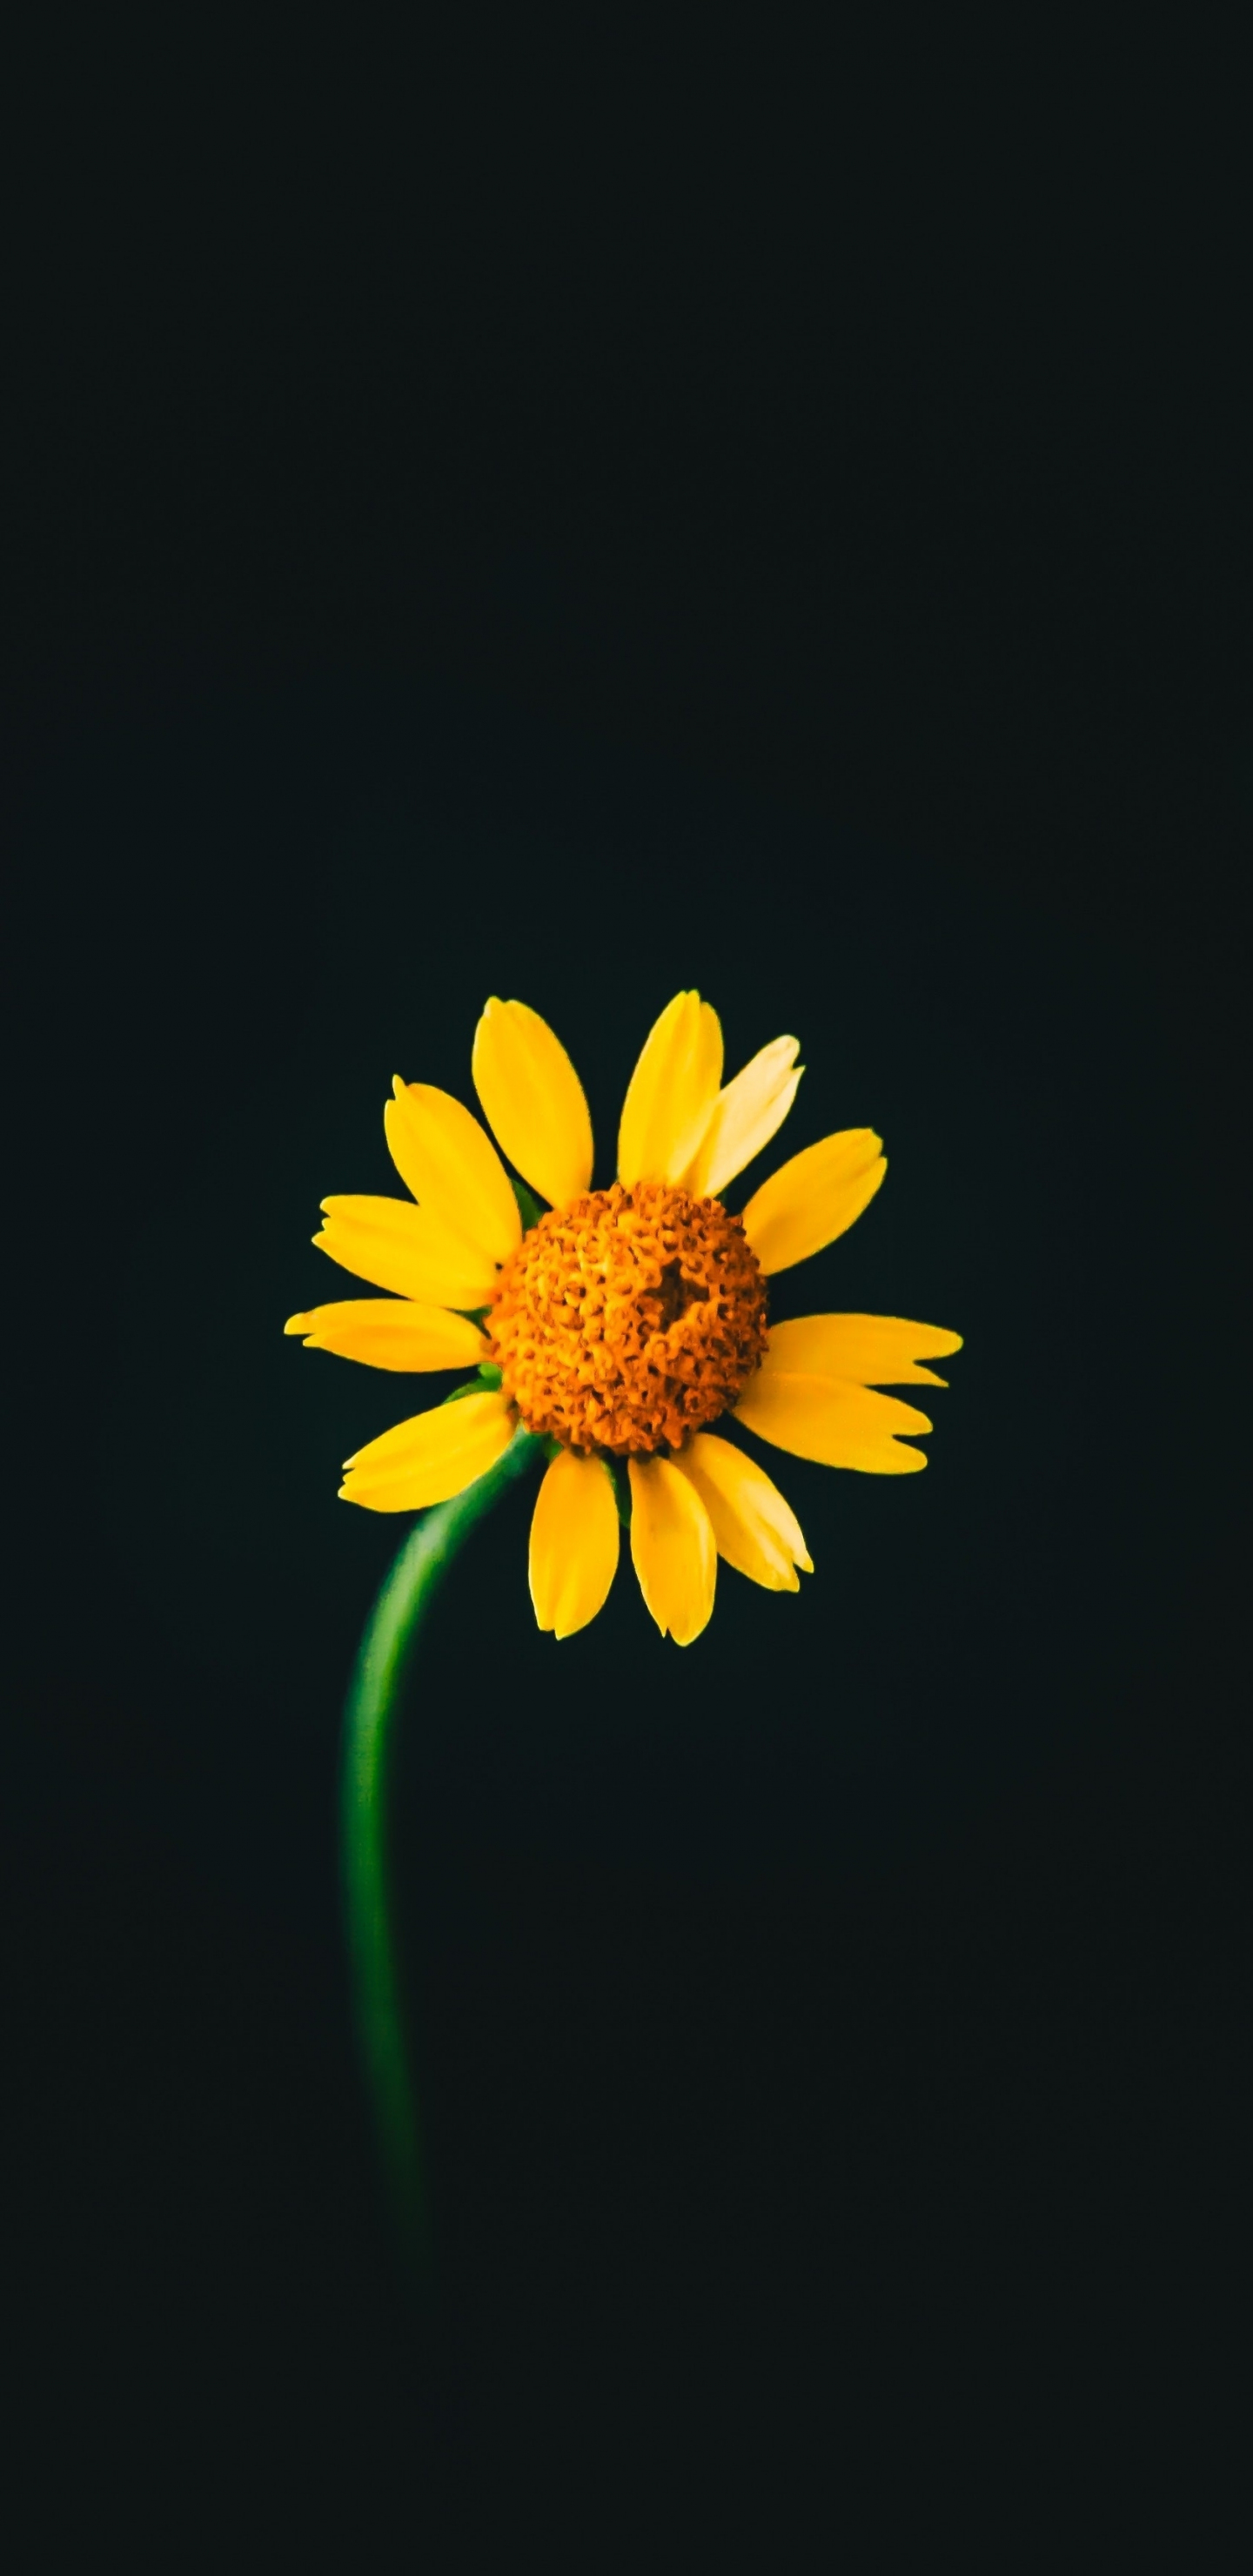 Flower Wallpapers for Samsung Galaxy S5 52